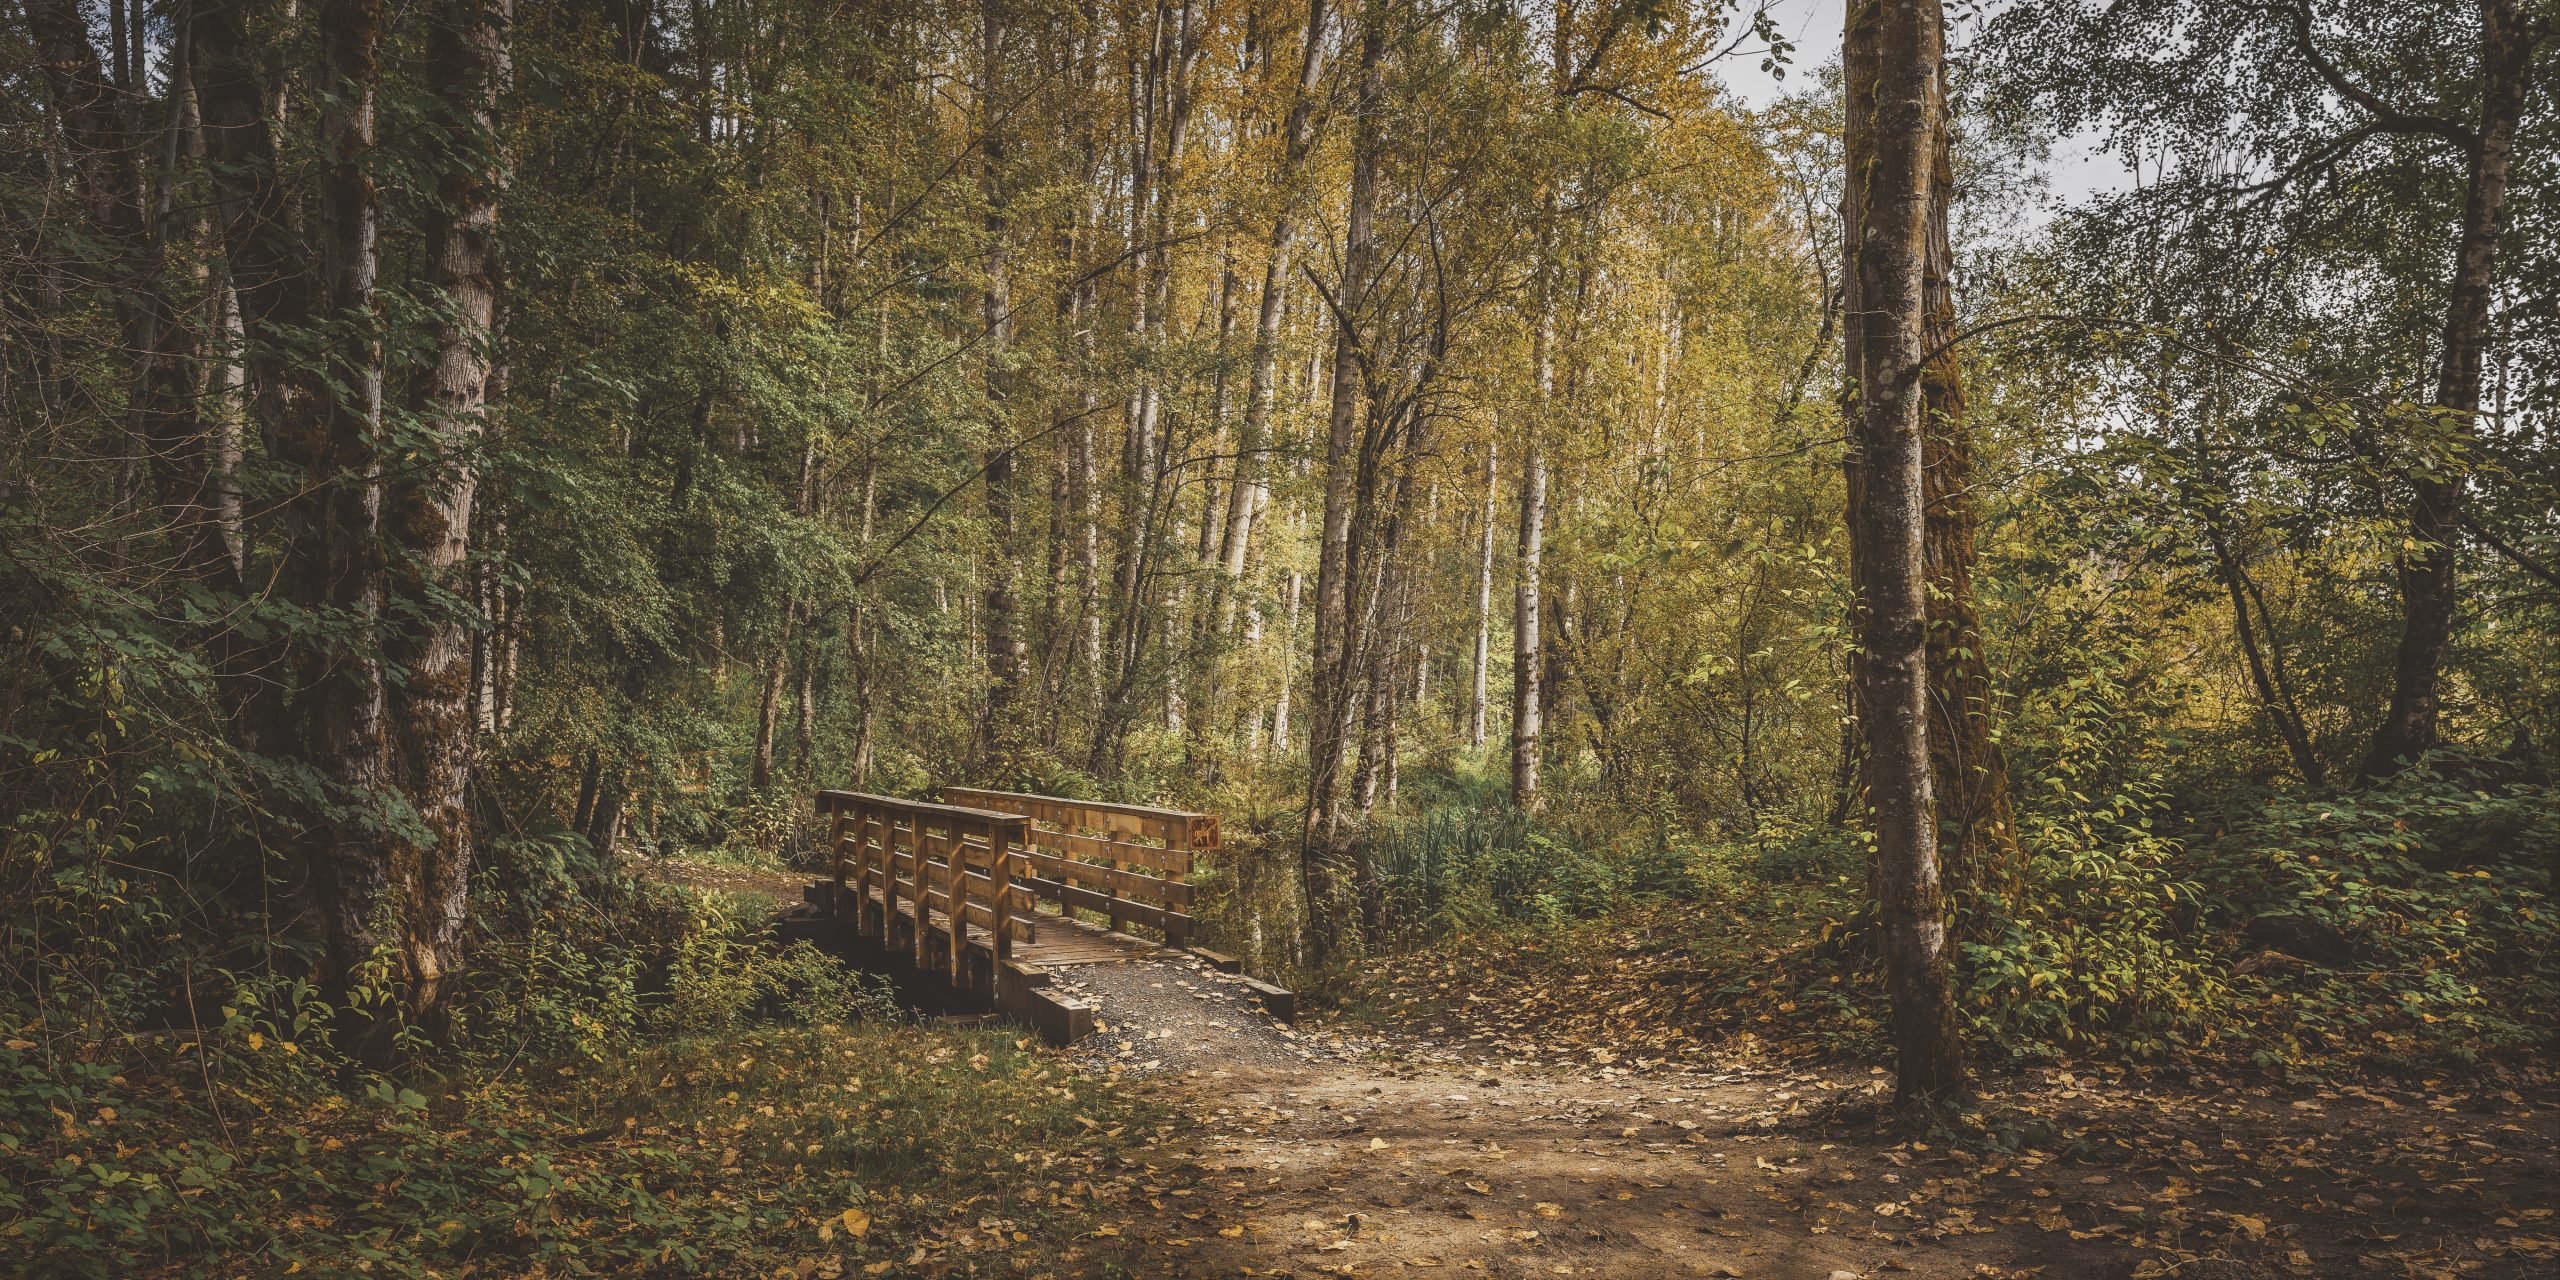 A wide shot of a wooden bridge in the middle of a forest with green and yellow leafed trees